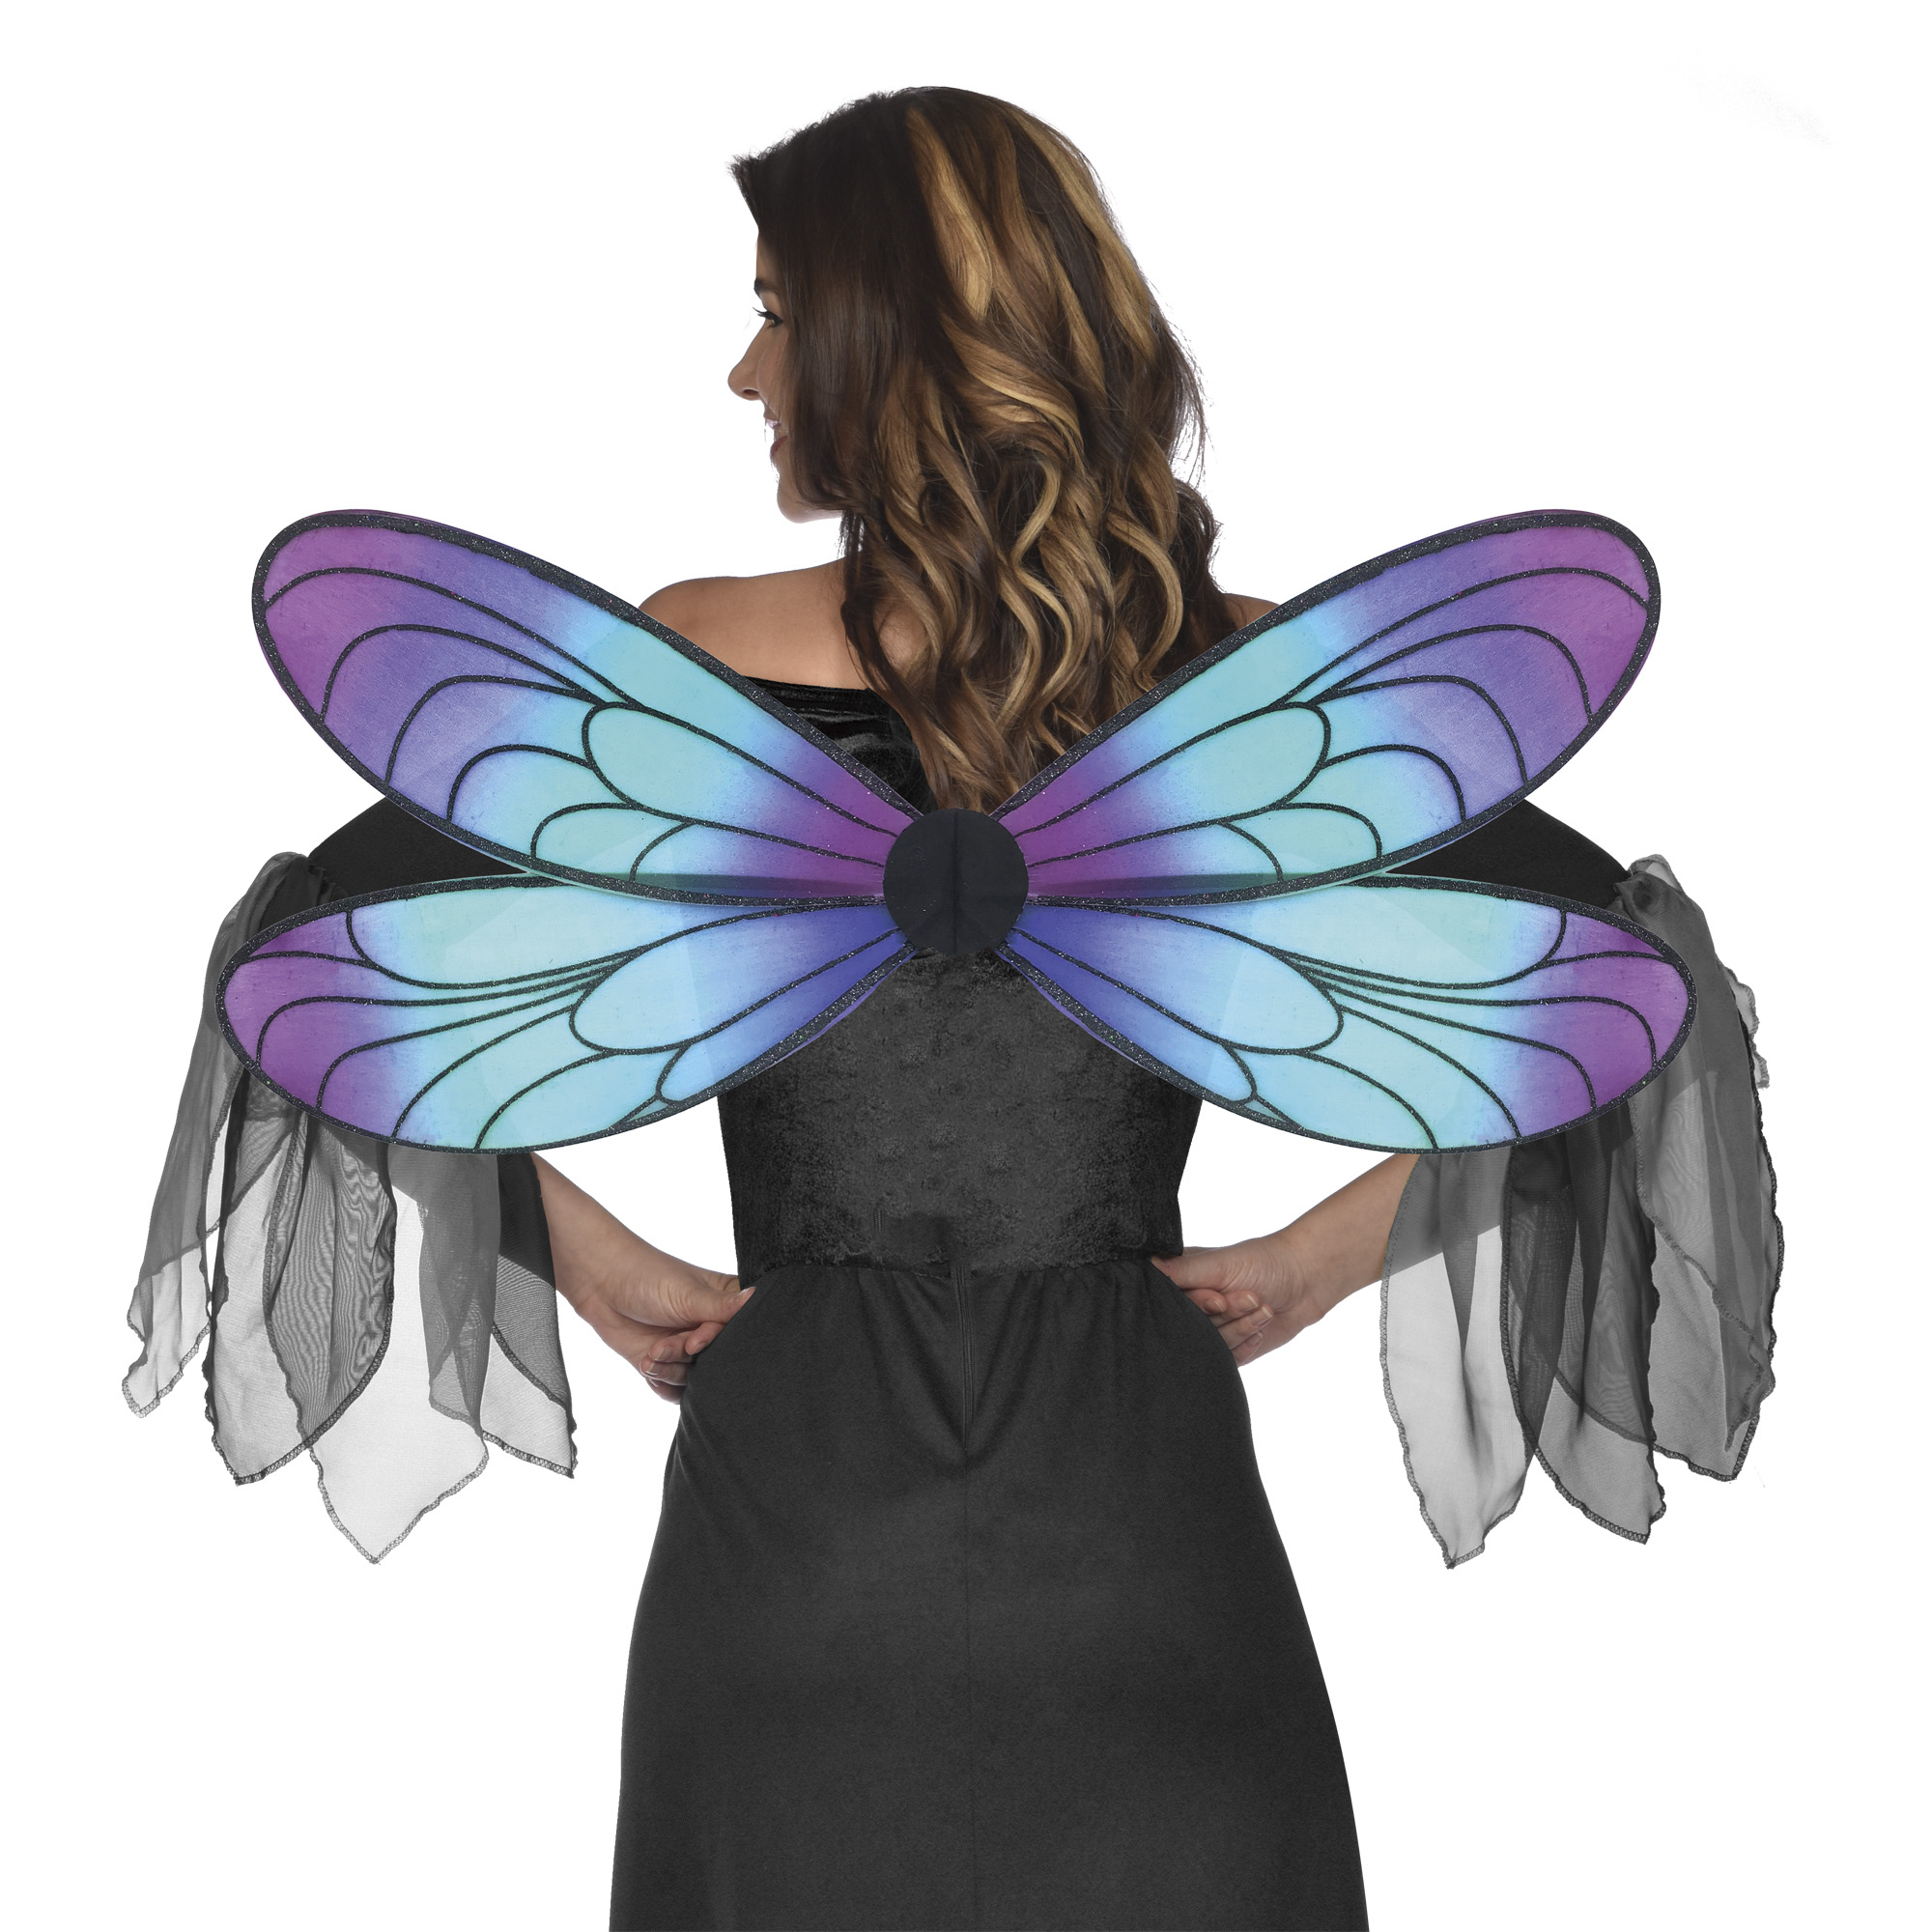 Halloween Women's Dragonfly Wings Costume Accessory, by Way to Celebrate, One Size - image 1 of 6